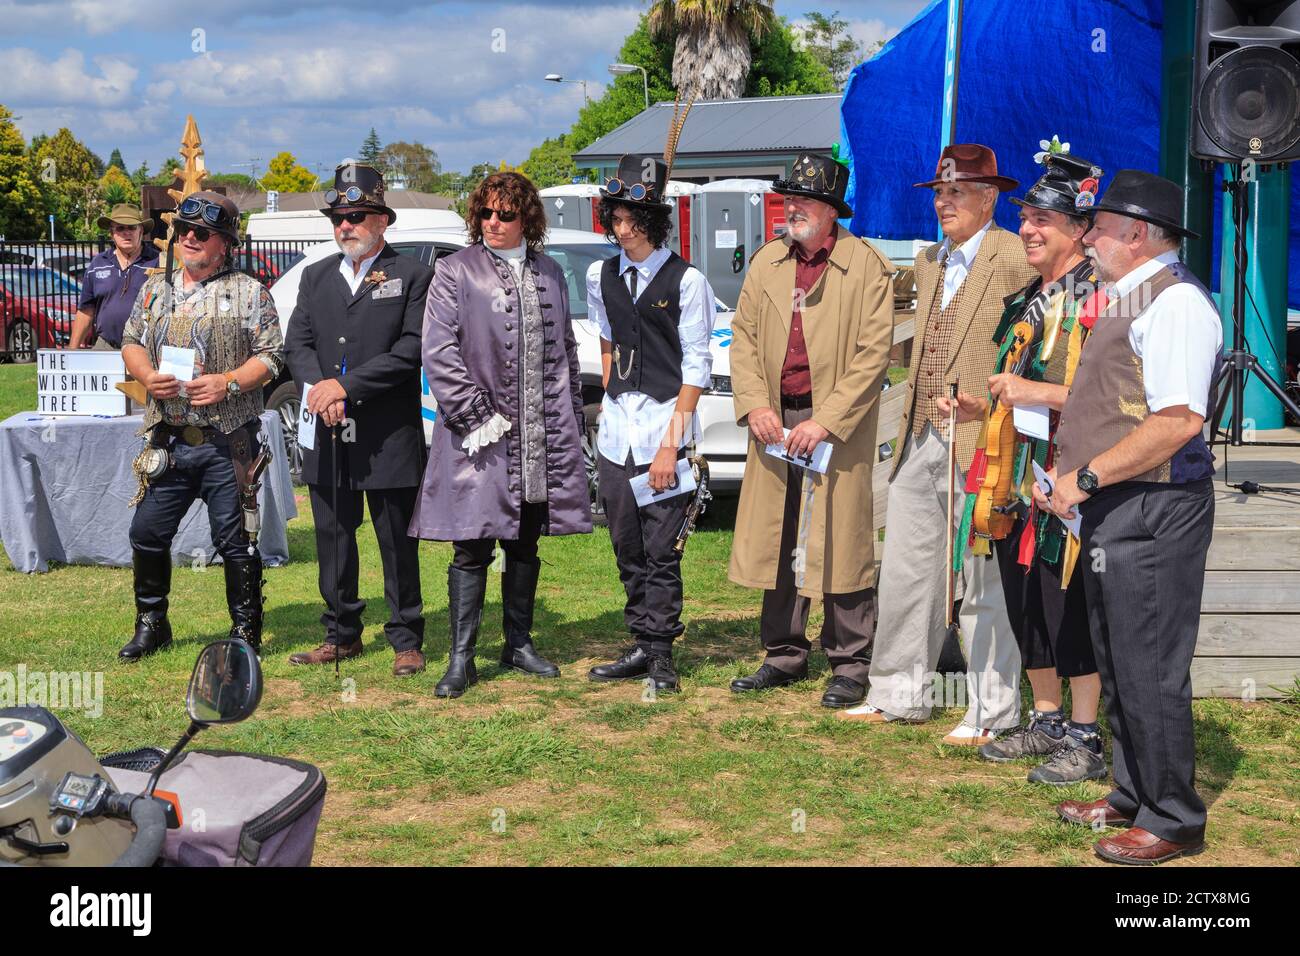 Men in elaborate vintage and steampunk themed clothing at a a village fair. Tauranga, New Zealand, March 16 2019 Stock Photo